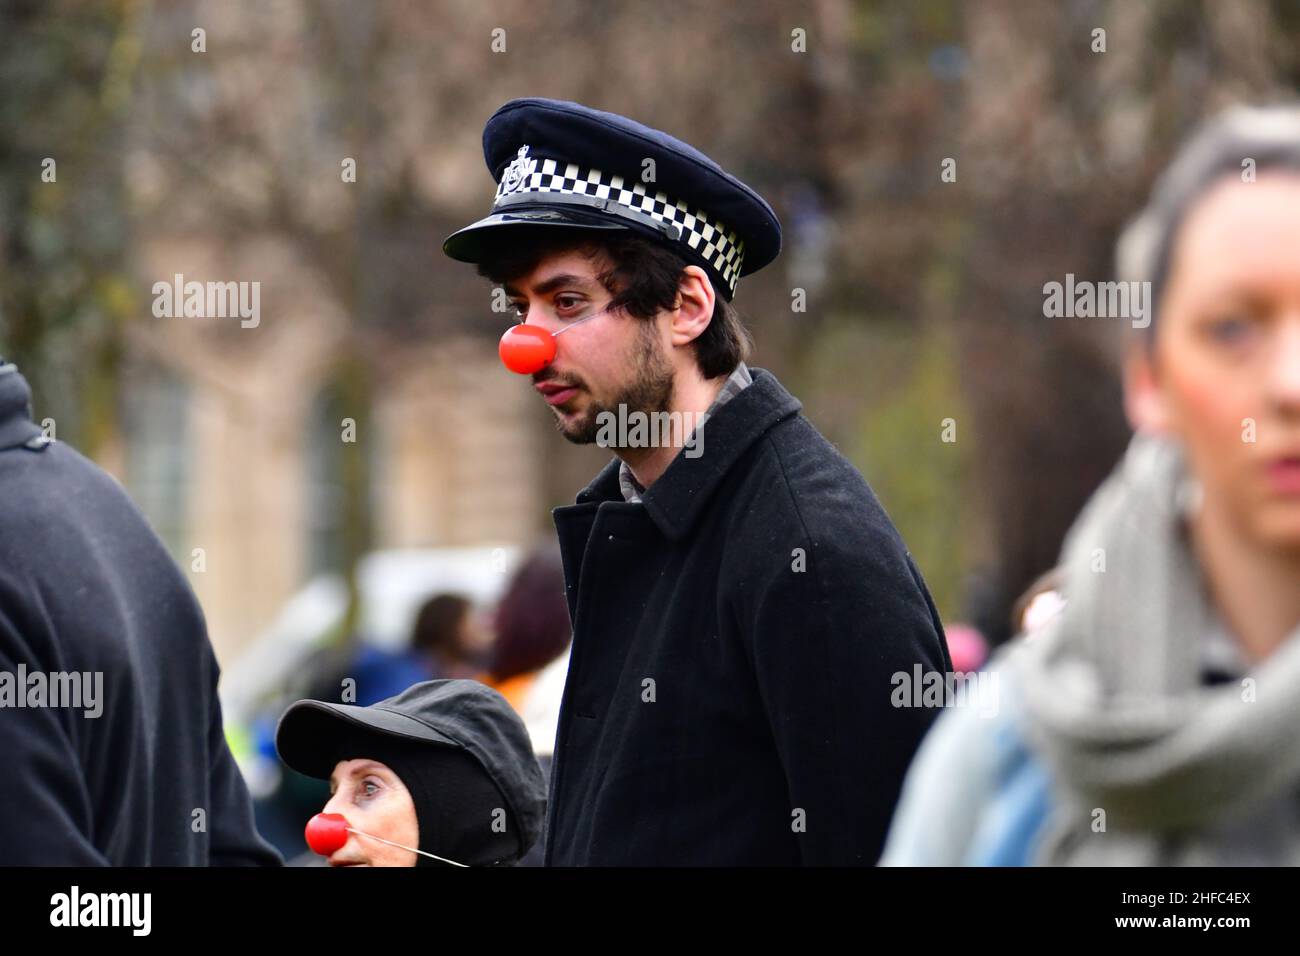 Bristol, UK. 15th Jan, 2022. On a mild afternoon activists dressed as police in fancy dress and other protesters are seen on College Green out side of City Hall, Protesting Kill the Bill and Youth Climate change. Picture Credit: Robert Timoney/Alamy Live News Stock Photo